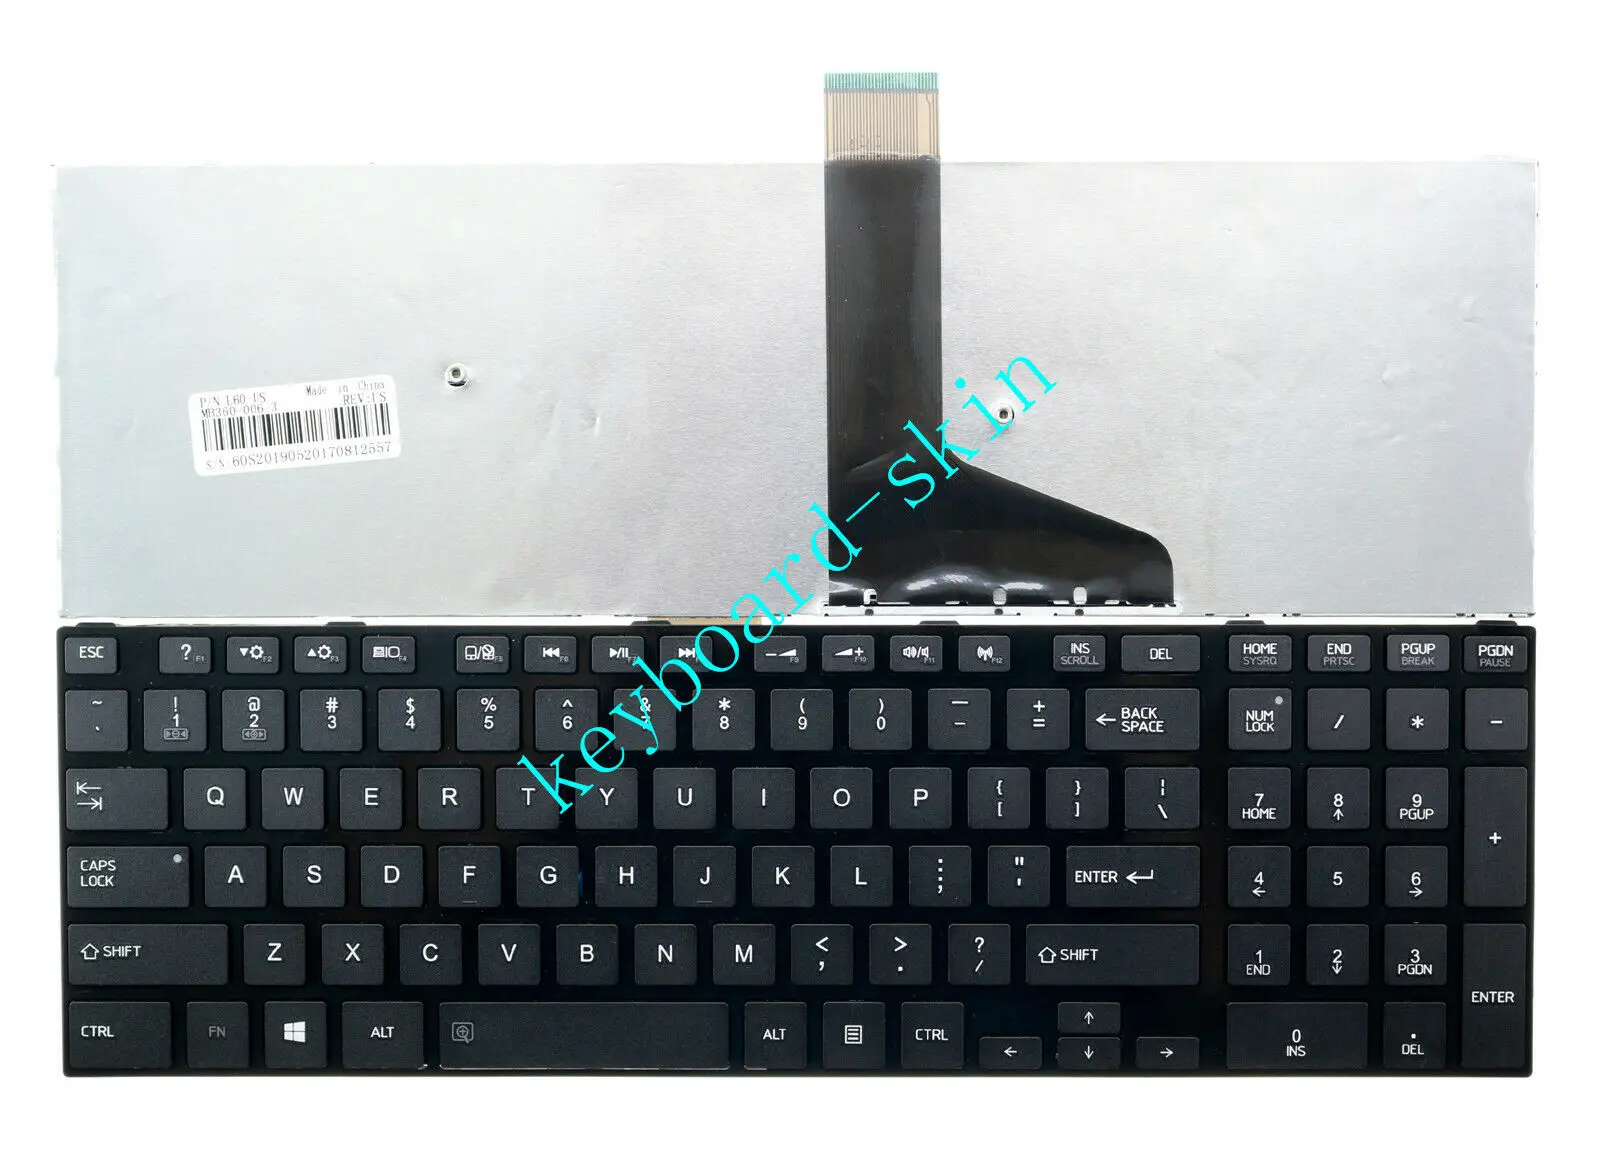 New US Chiclet Non-backlit Keyboard for Toshiba S70-A,S70D-A, S70t-A,S75-A,S75D-A,S75t-A,S70-B,S70D-B,S70t-B,S75-B,S75D-B,S75t-B